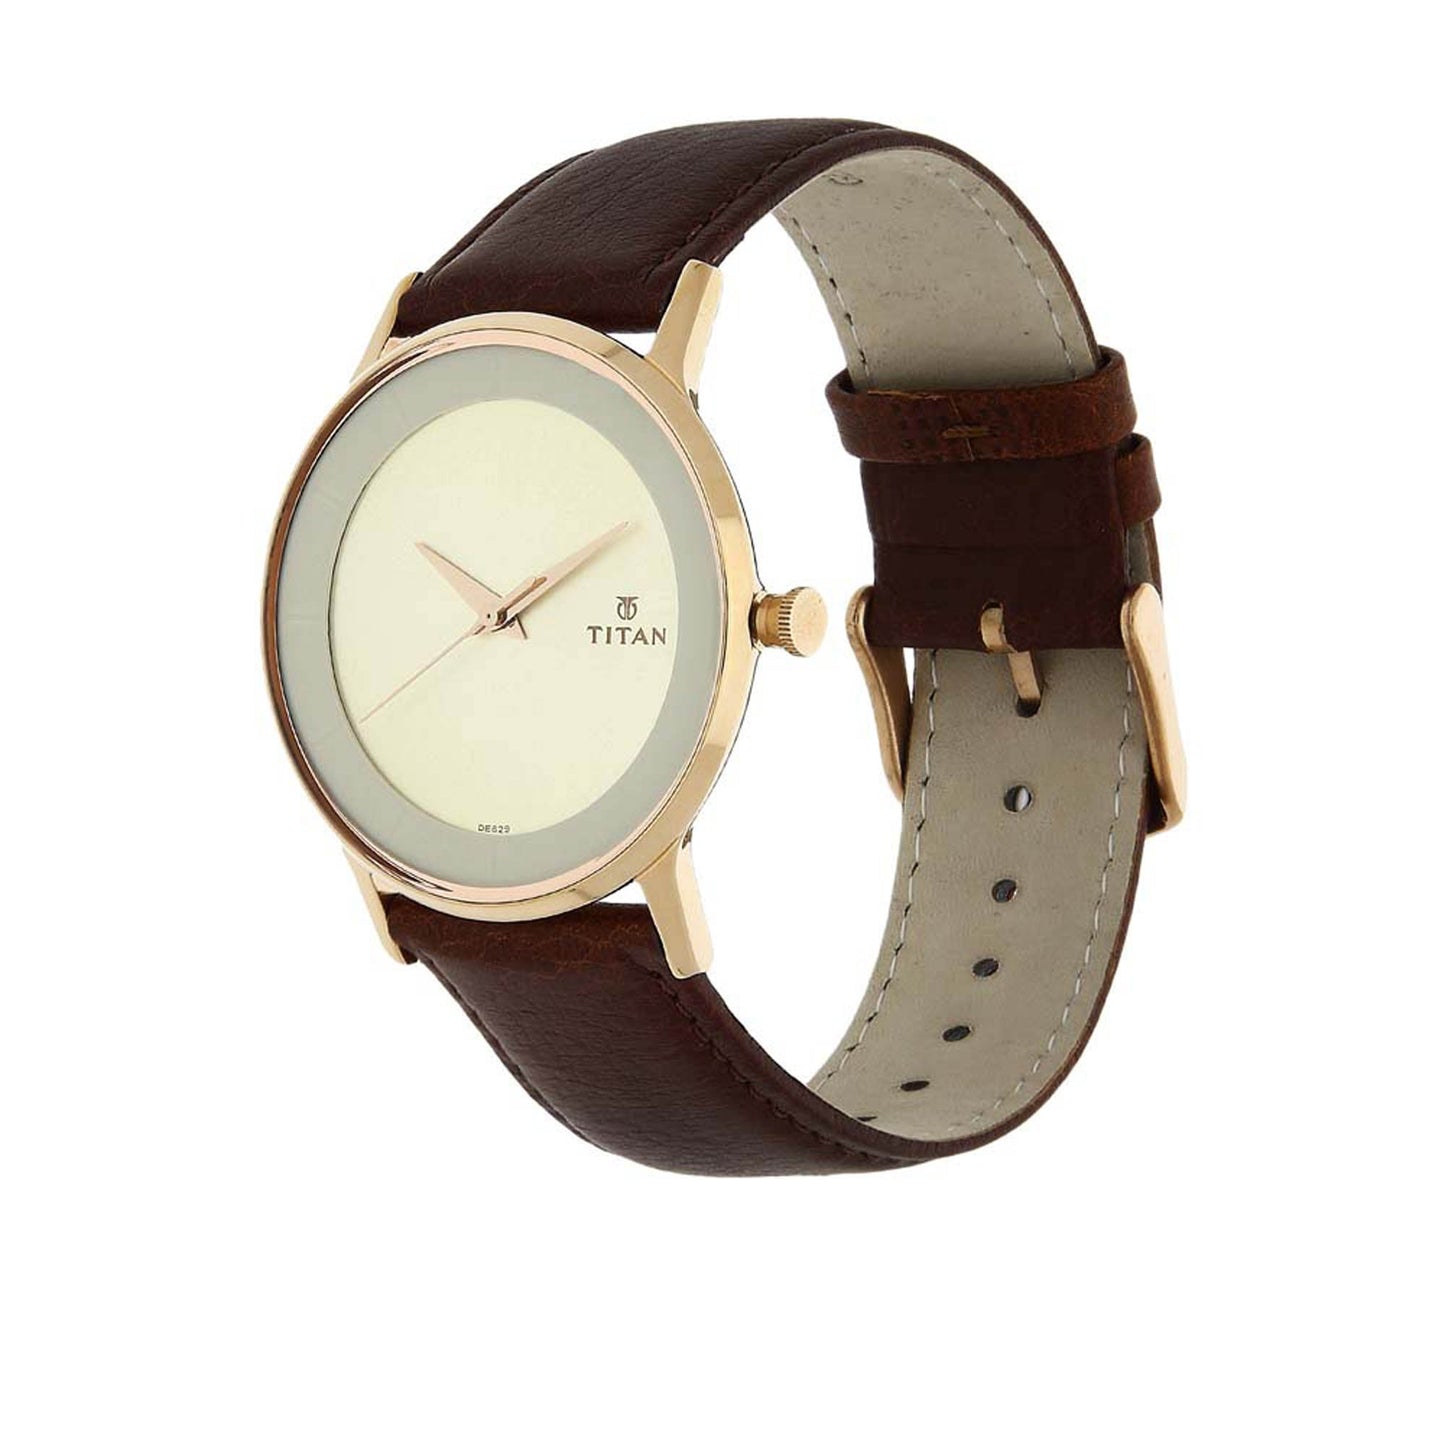 Titan Champagne Dial Analog Leather Strap watch for Men